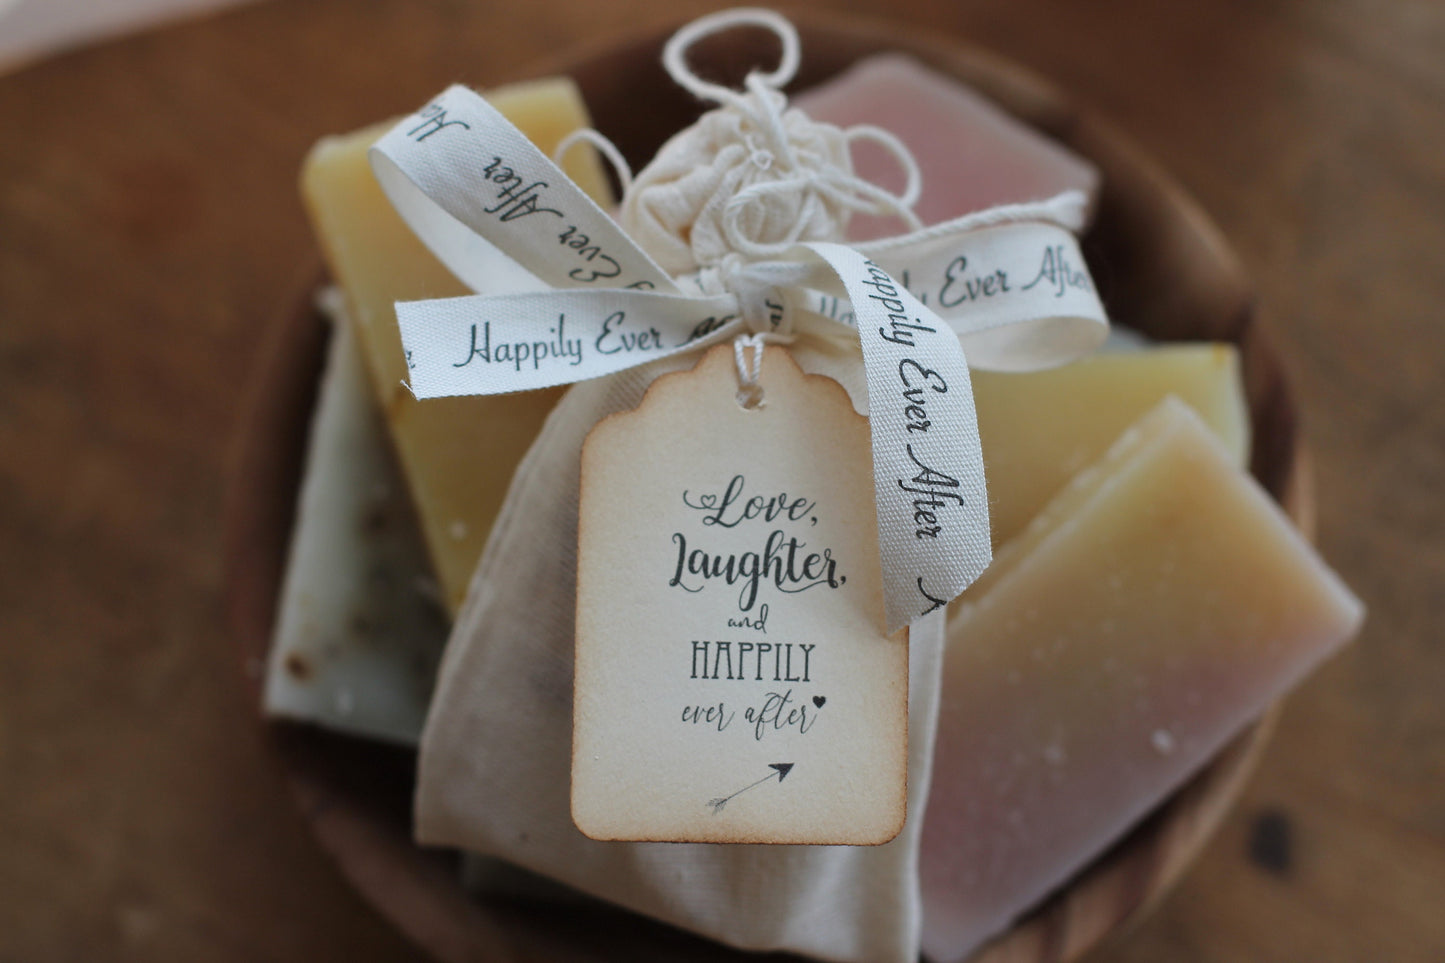 Happily Ever After Wedding Favor- Weddings-Bridal-Baby-Showers-Place Card Favors-Save the Date-Belle Savon Vermont